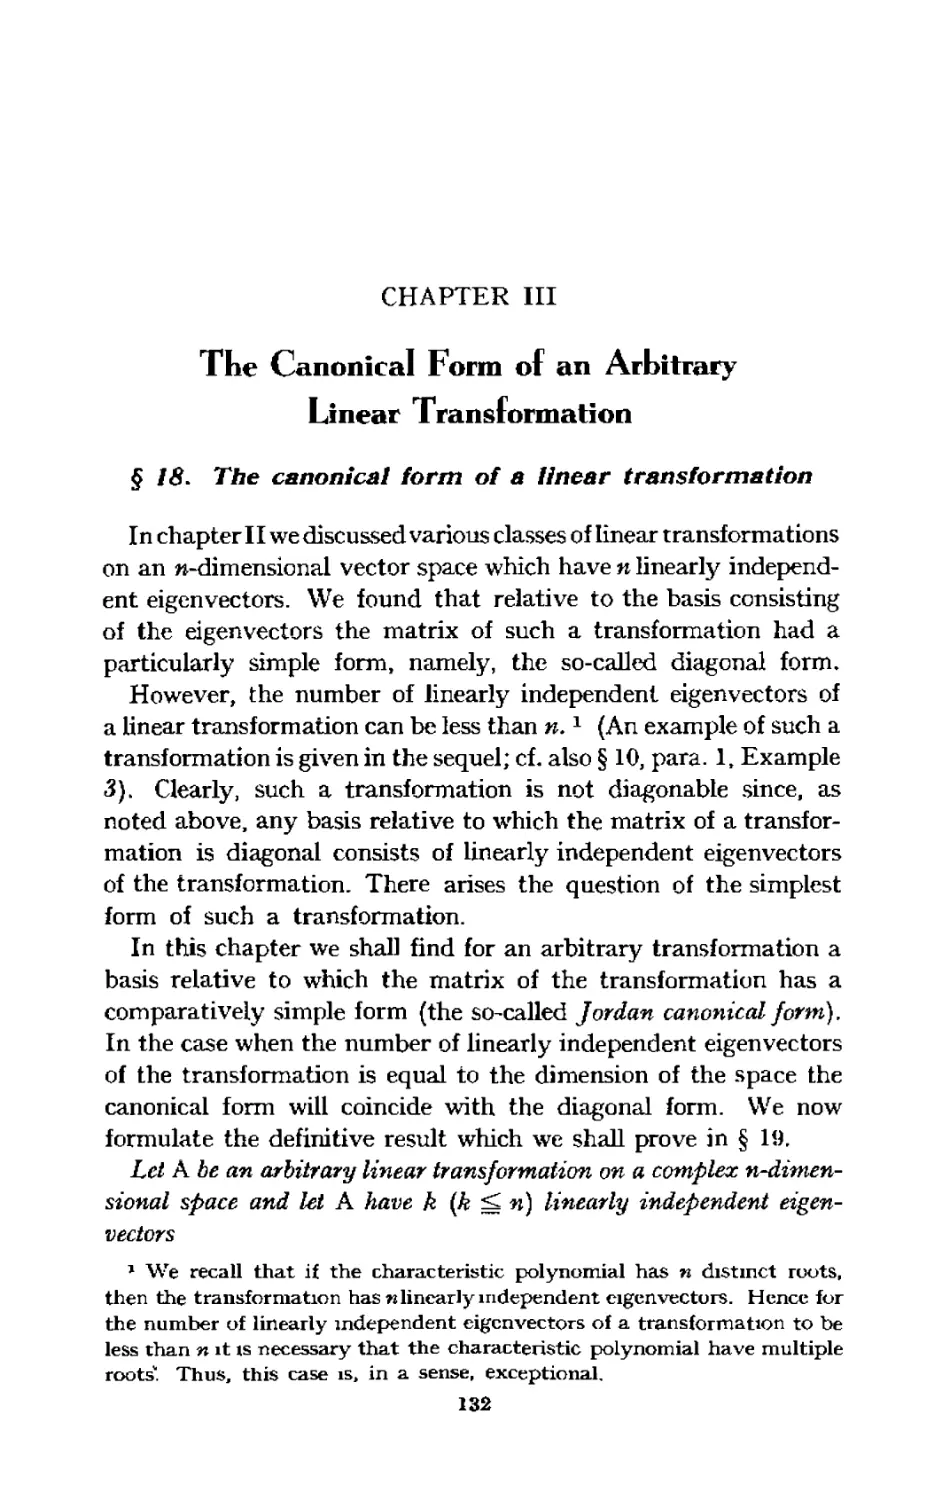 III. The Canonical Form of an Arbitrary Linear Transformation